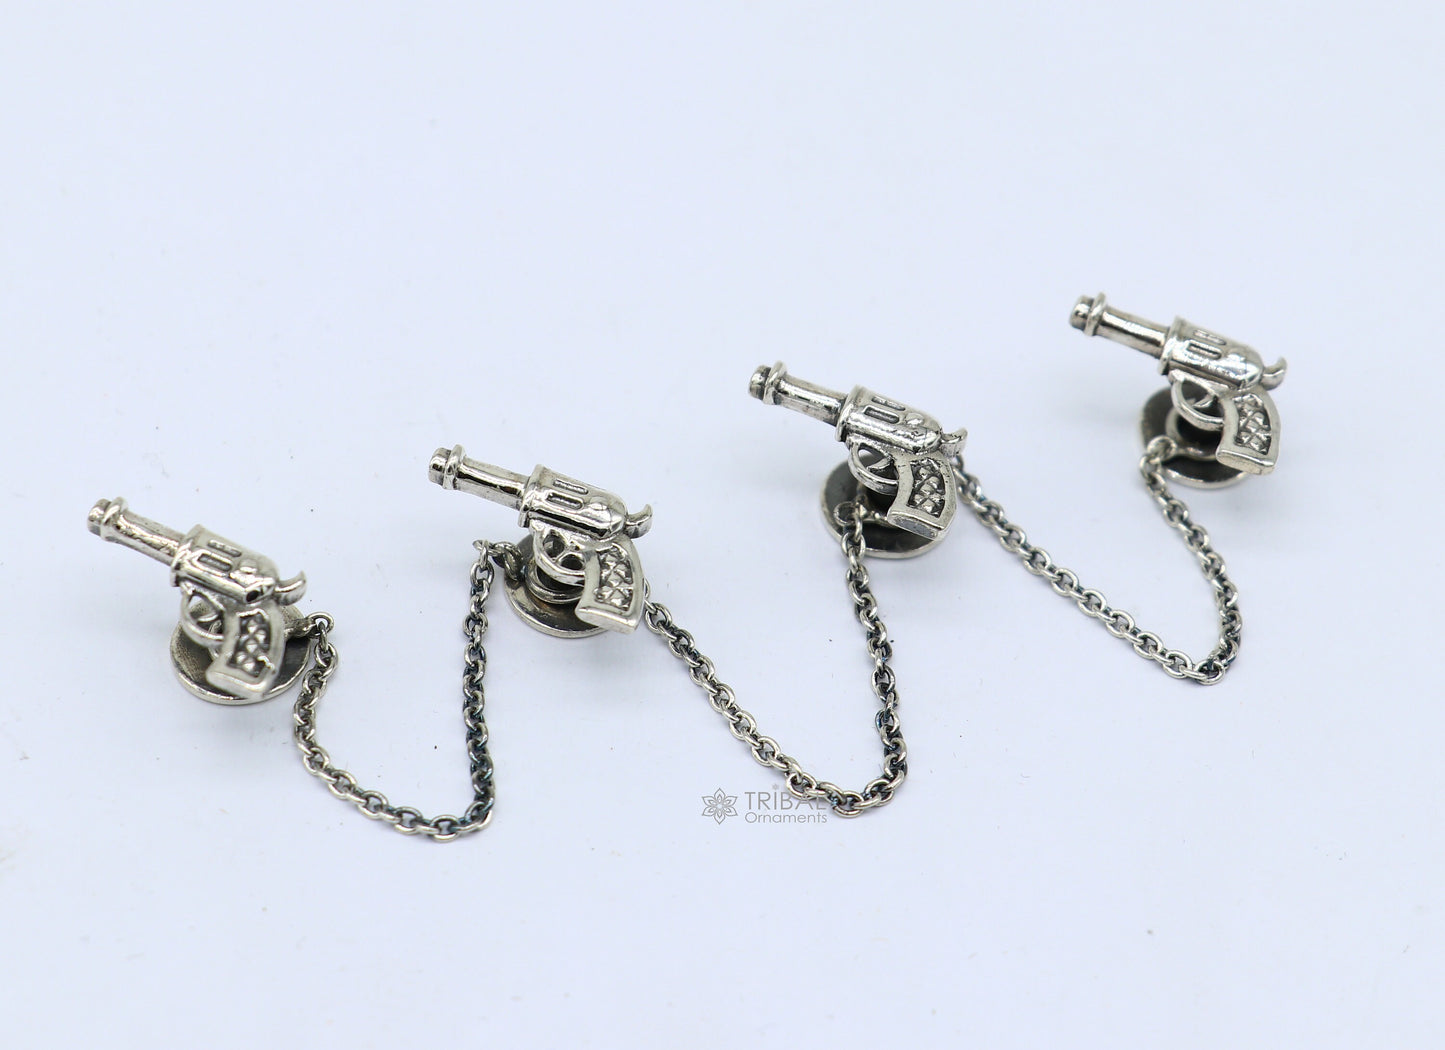 Gun design 925 Sterling Silver set of 4 kurta Buttons for Fashion Perfection, silver cufflinks, cultural trendy jewelry btn48 - TRIBAL ORNAMENTS